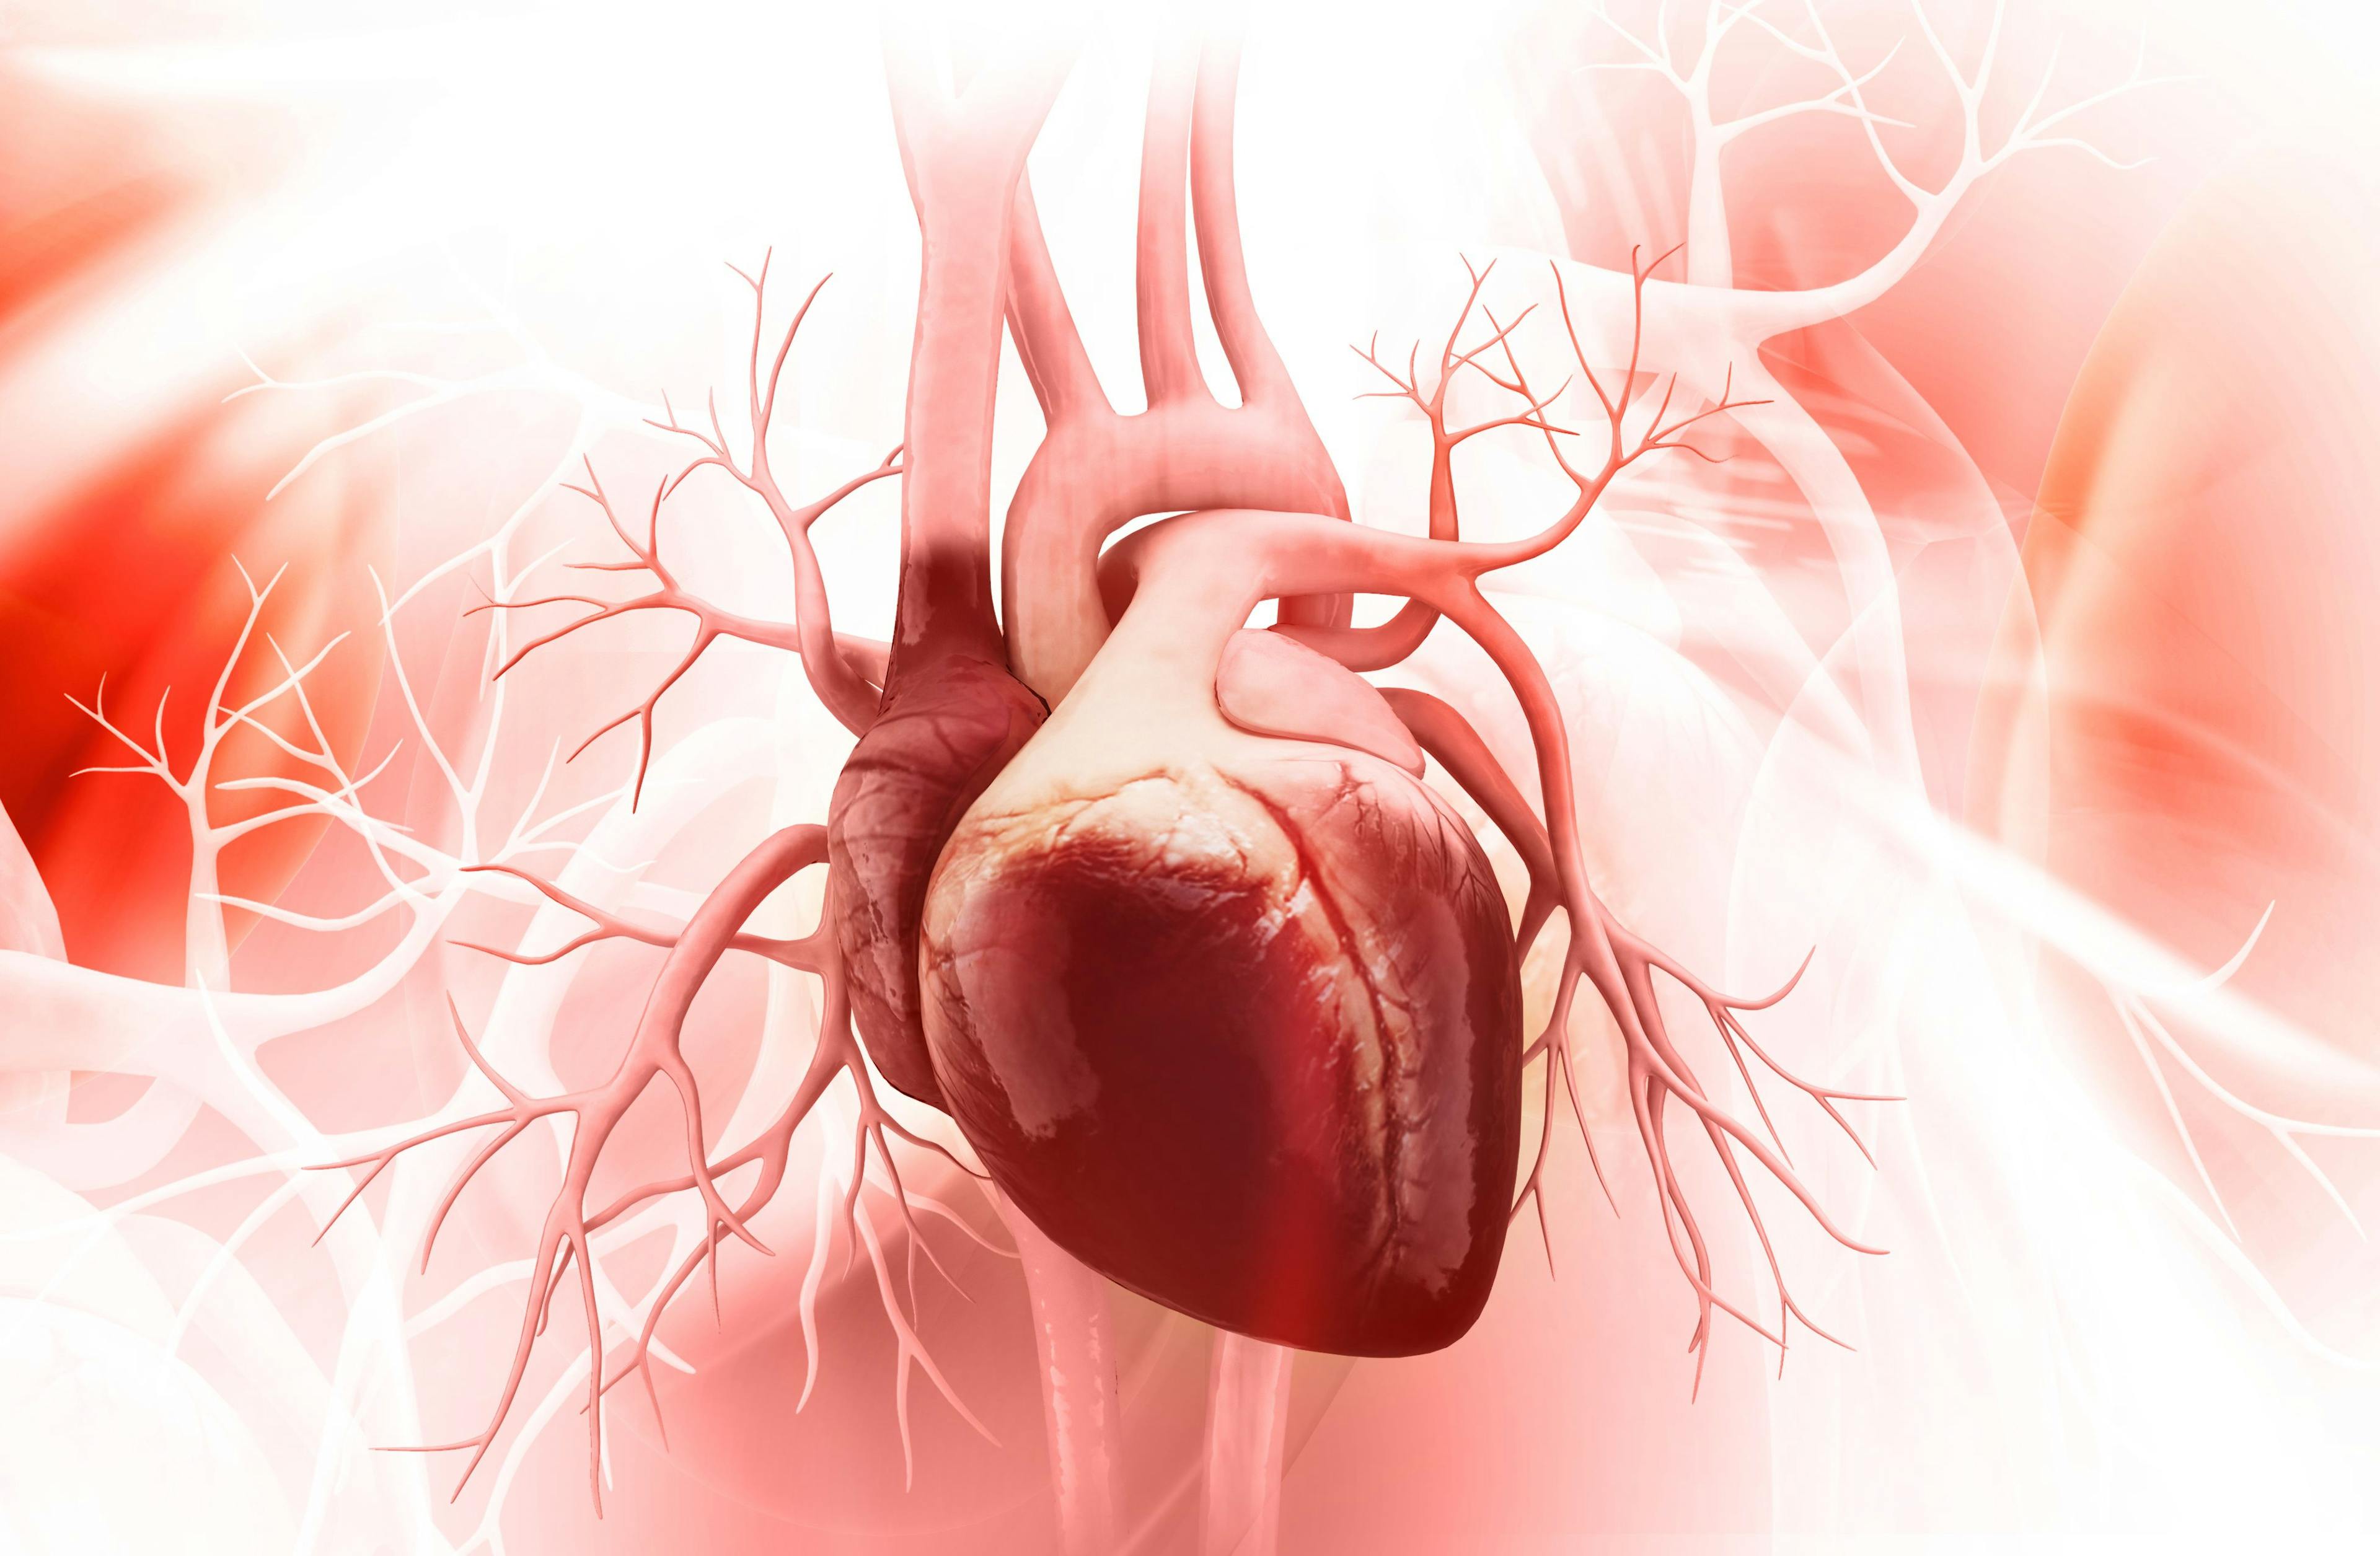 Study: Left Atrial Strain Could Be a Sign of Fabry Cardiomyopathy